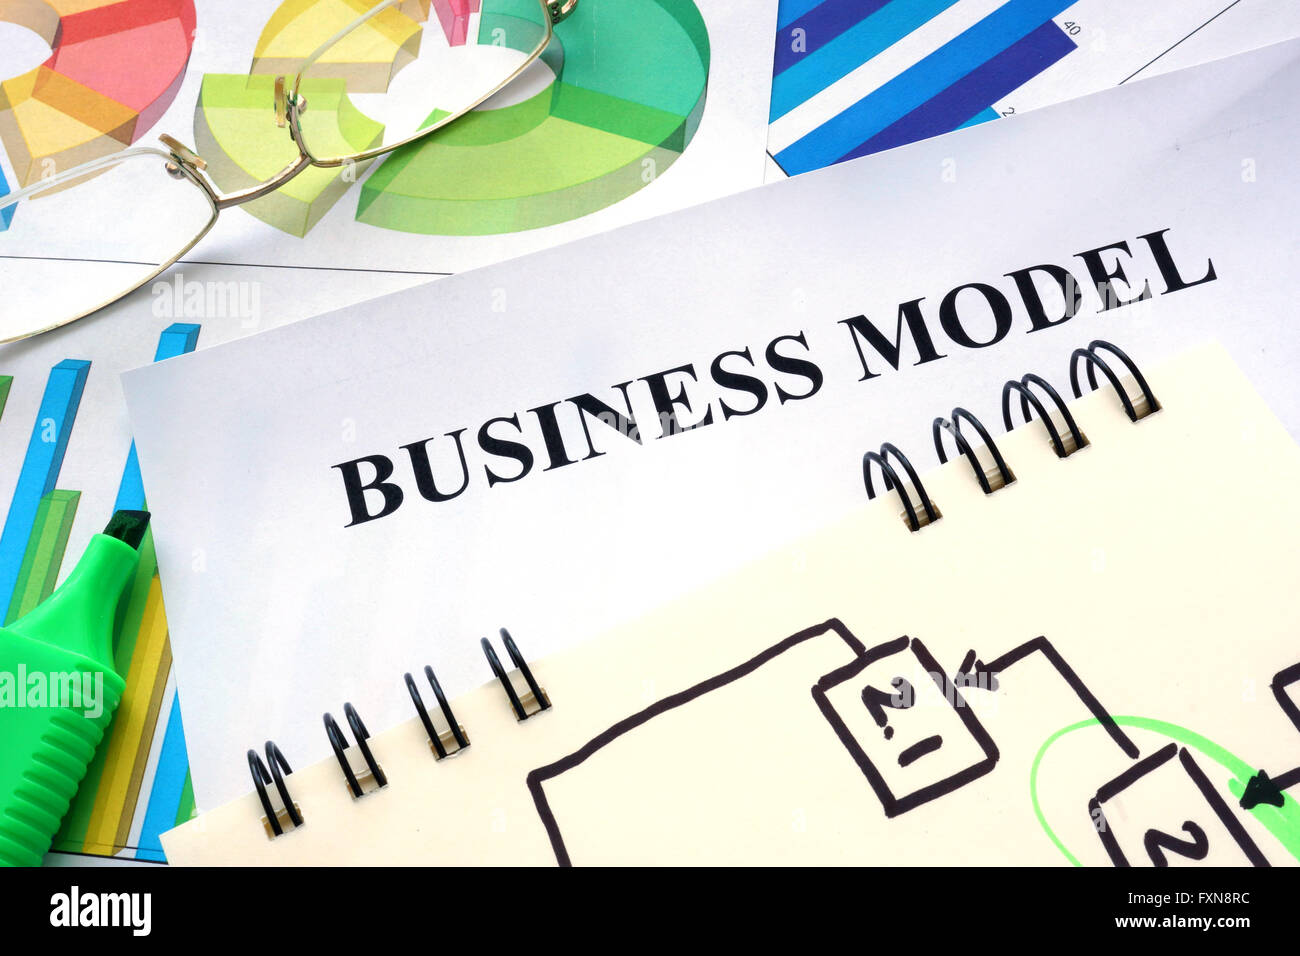 Business model written in a notebook. Business concept. Stock Photo